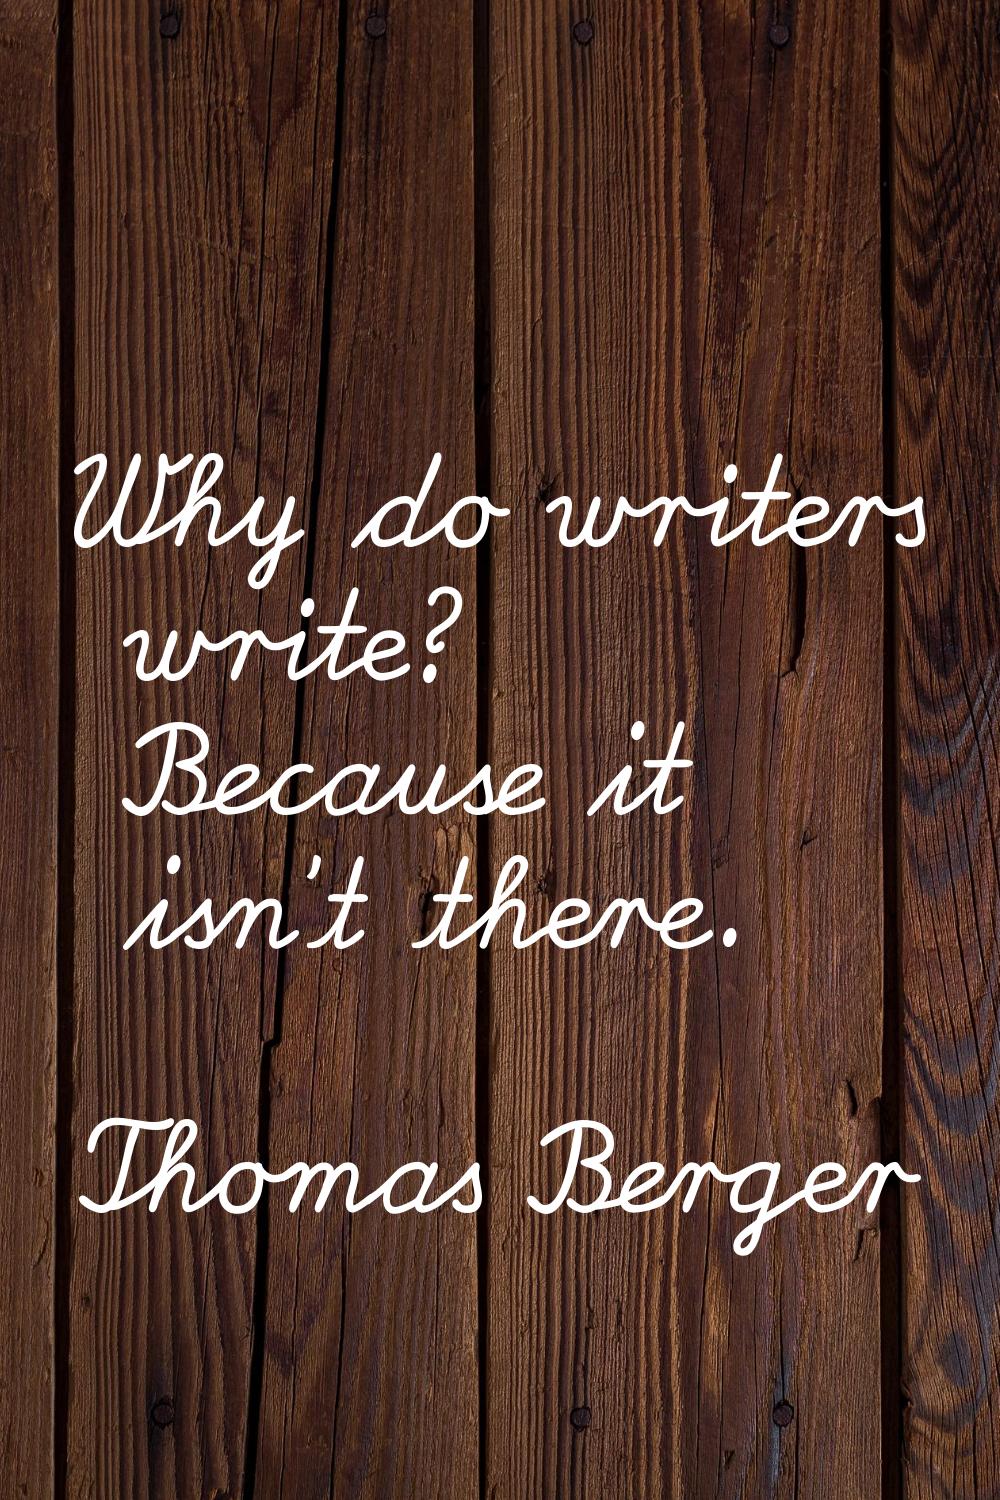 Why do writers write? Because it isn't there.